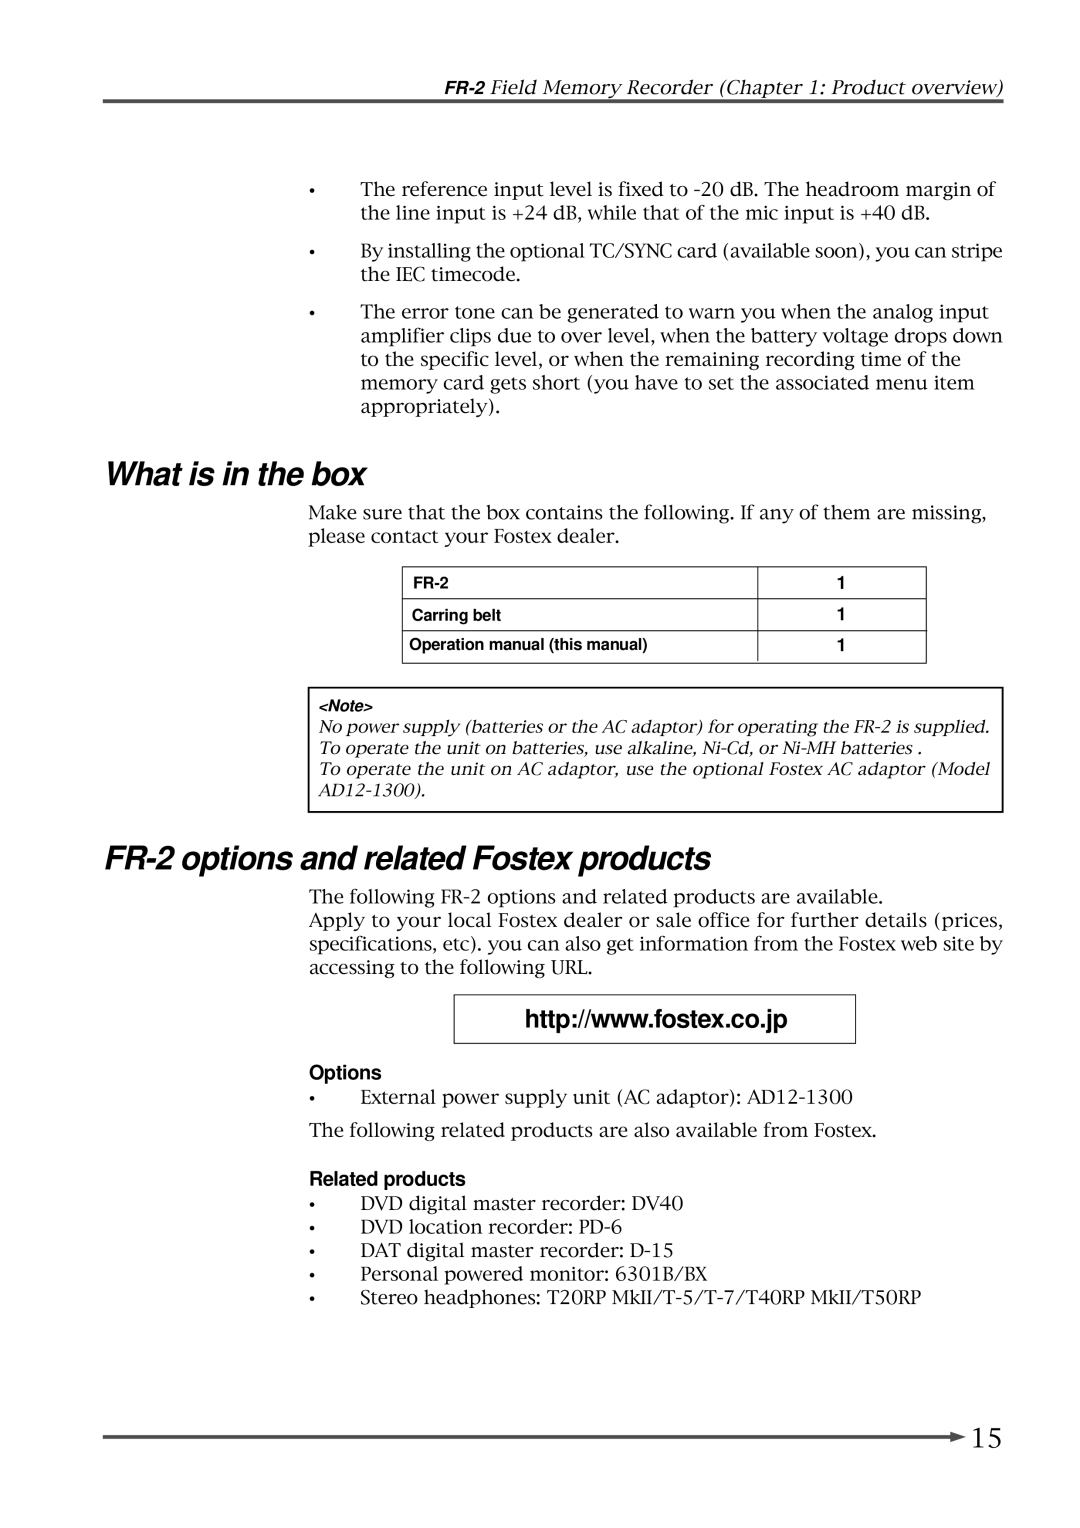 Fostex owner manual What is in the box, FR-2 Carring belt 